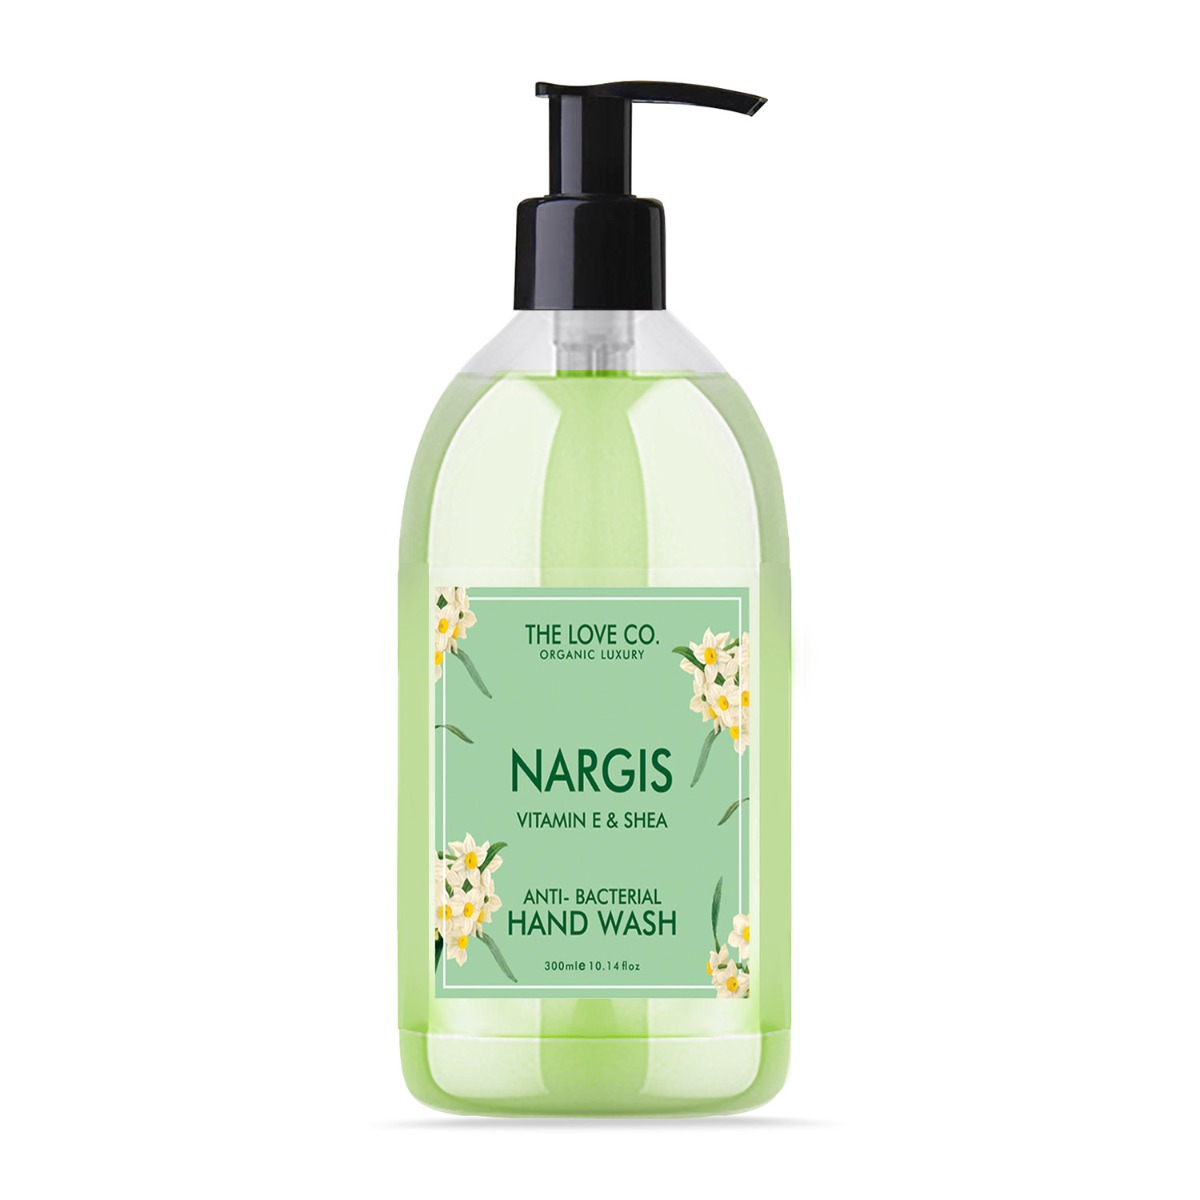 The Love Co. Nargis Anti-Bacterial Hand Wash, 300ml